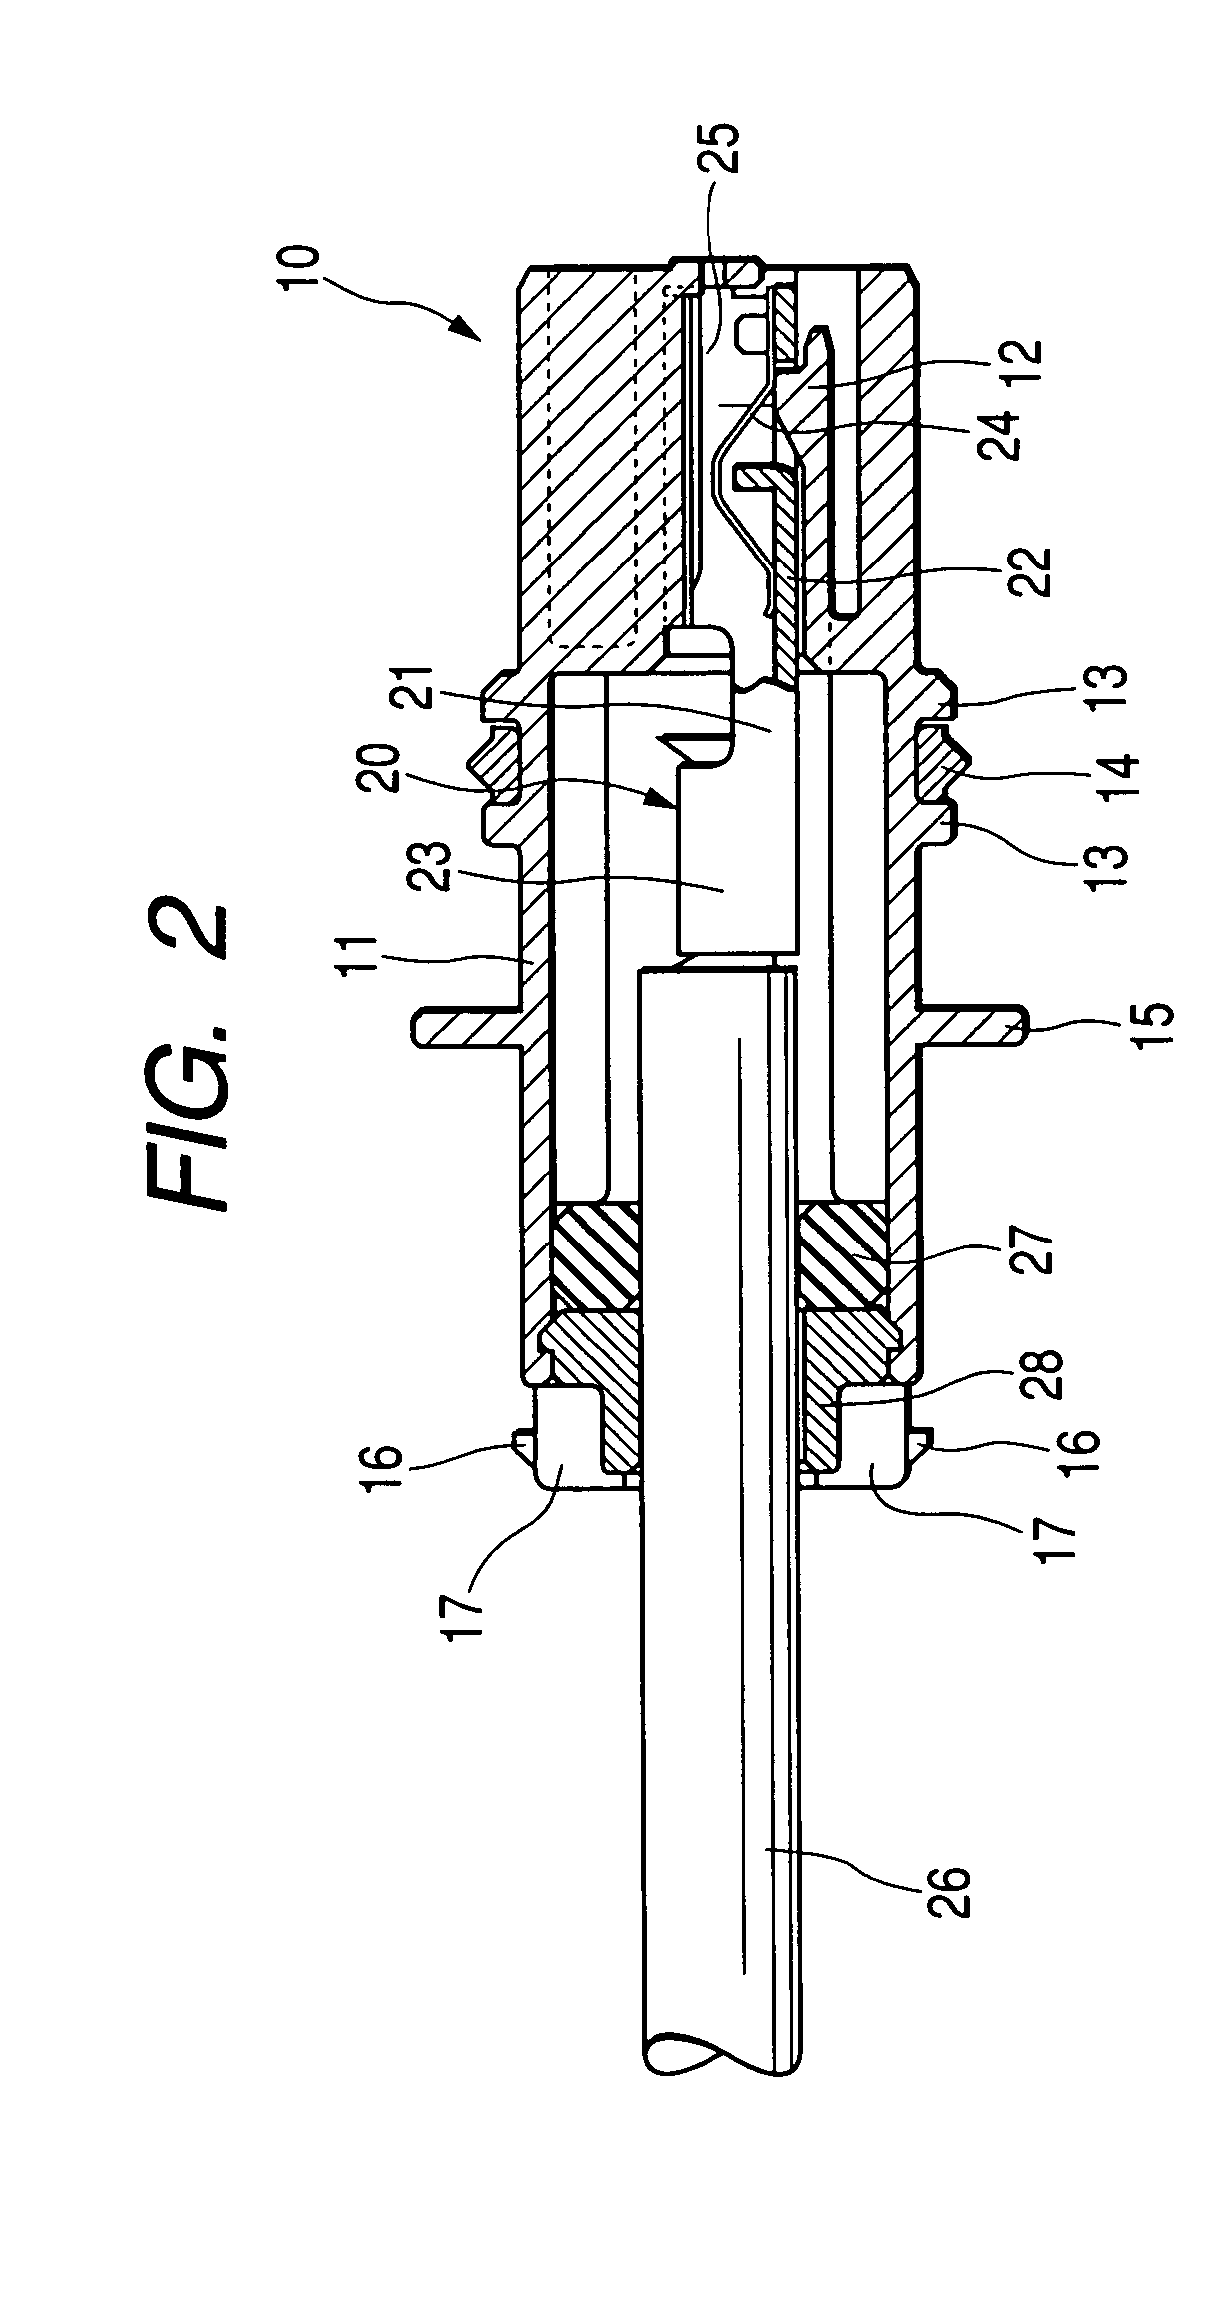 Connecting structure of connector, shield connector and lever type connector